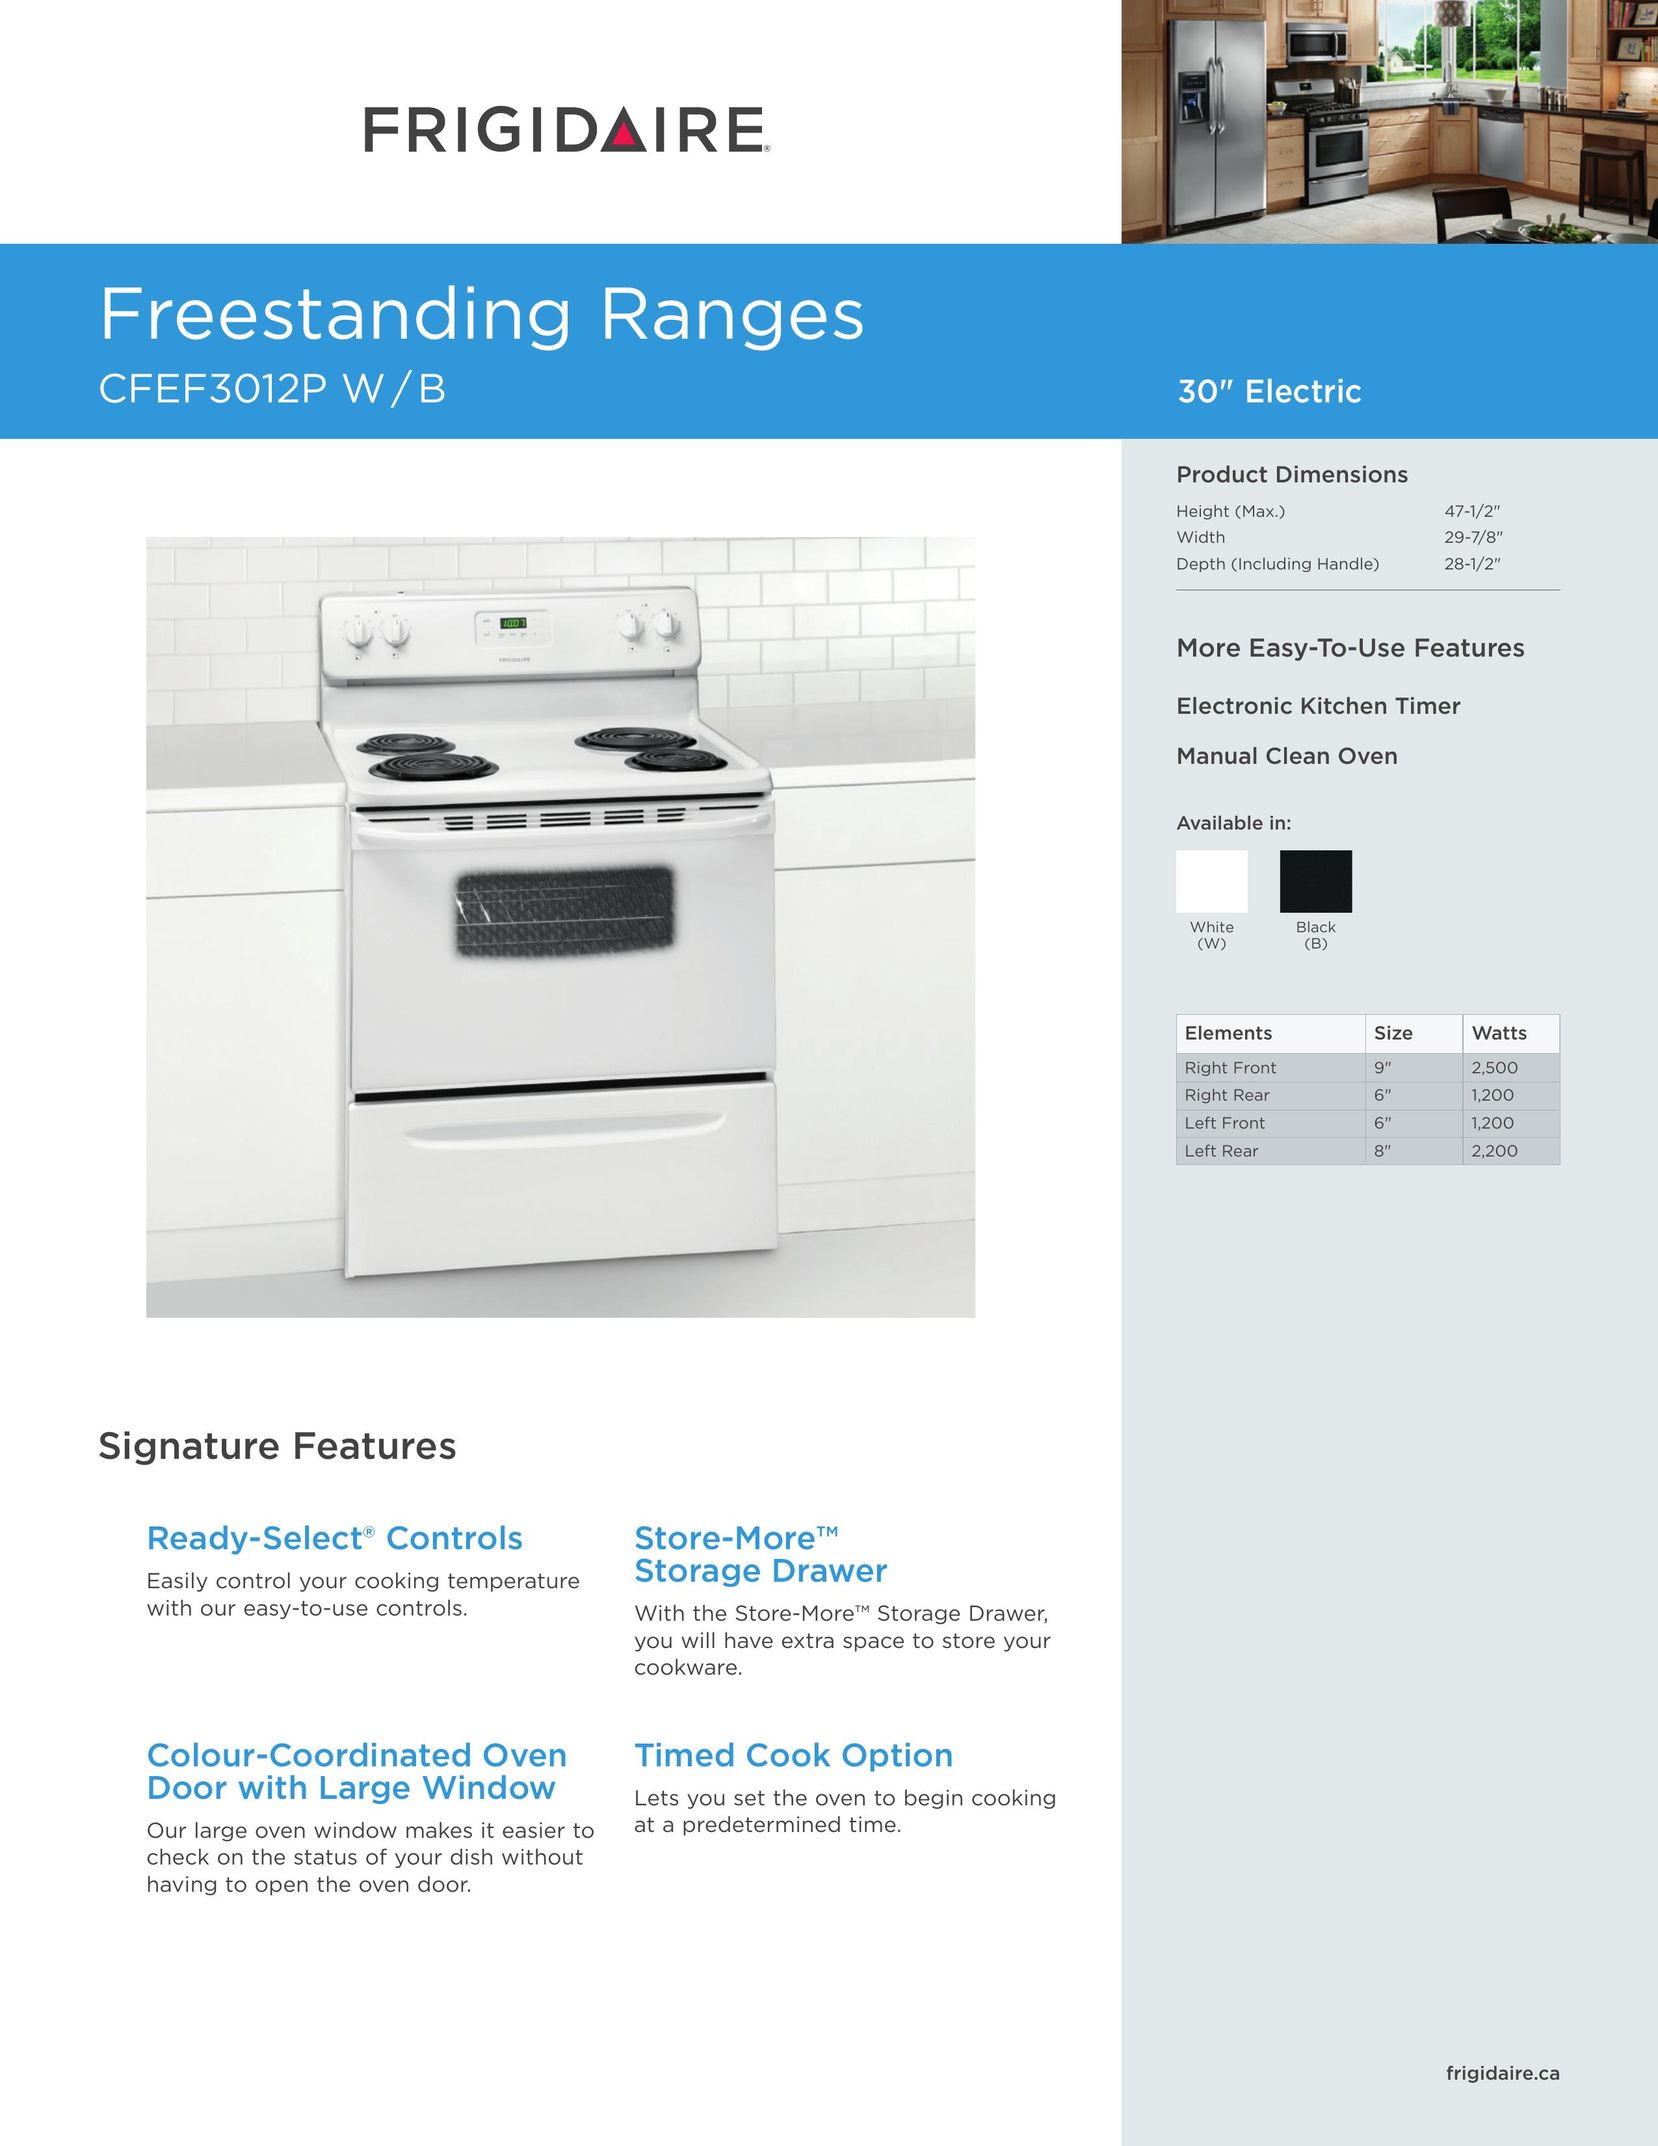 Frigidaire CFEF3012P W/B Double Oven User Manual